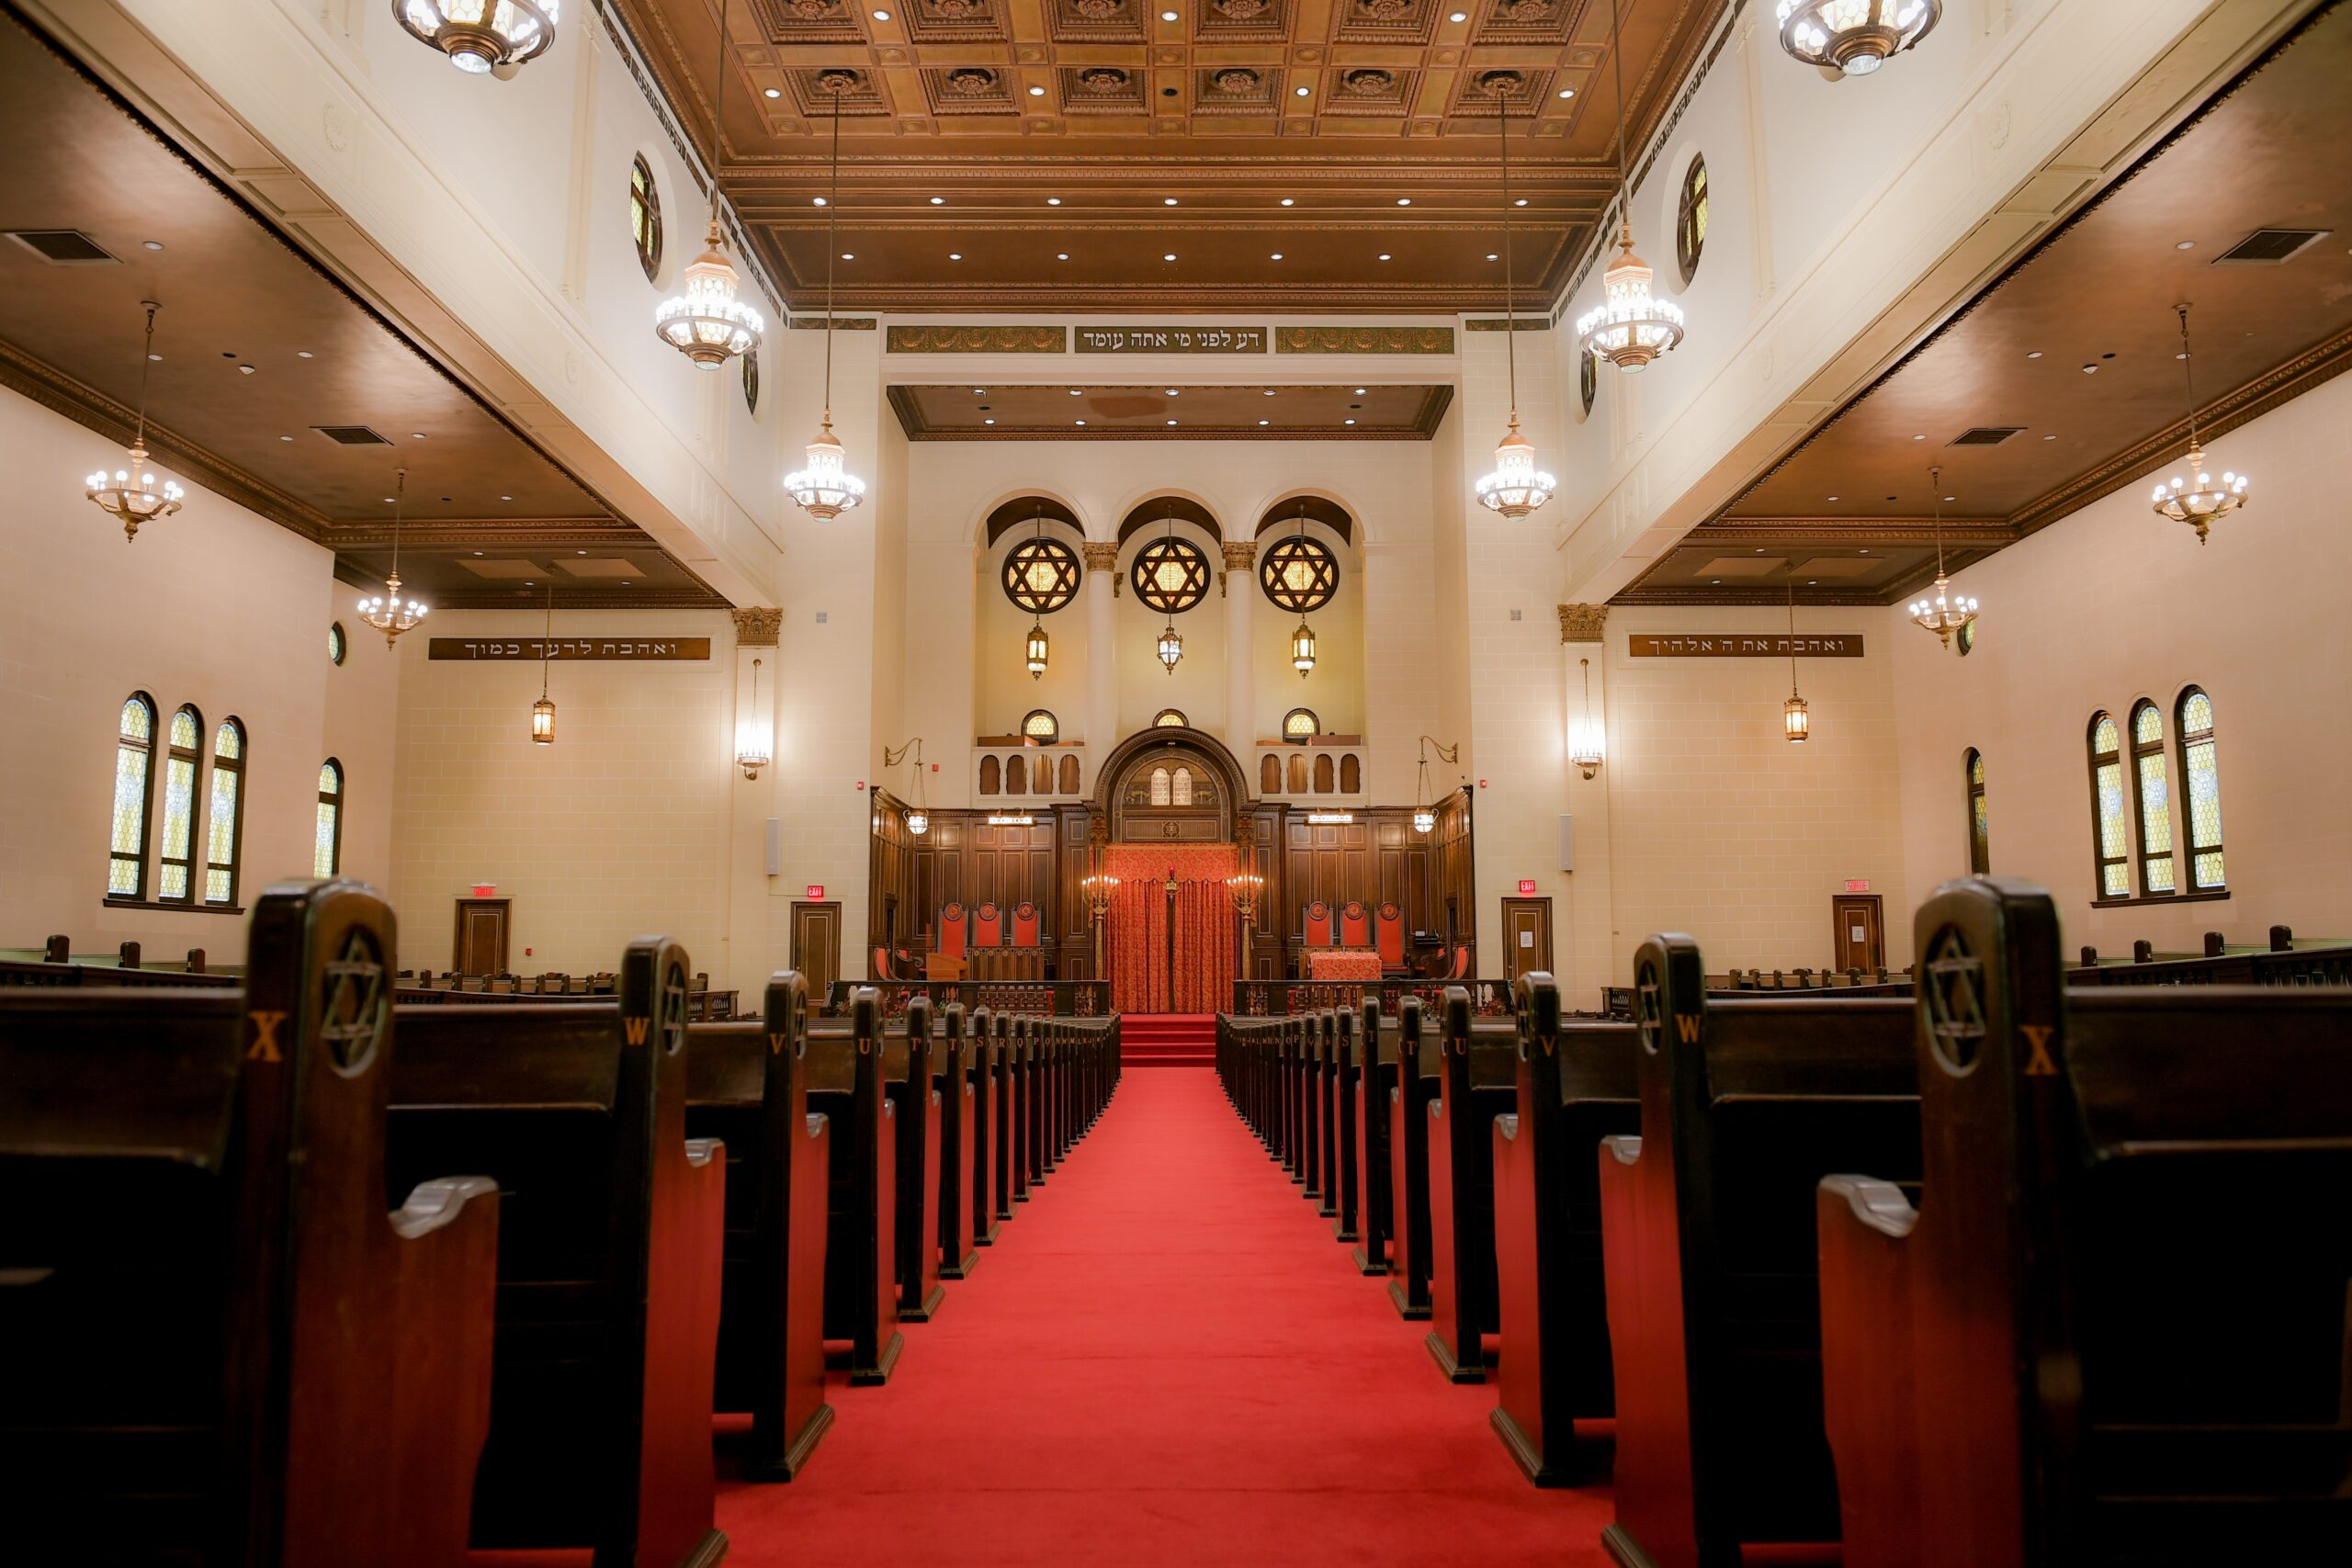 synagogue sanctuary with red carpet